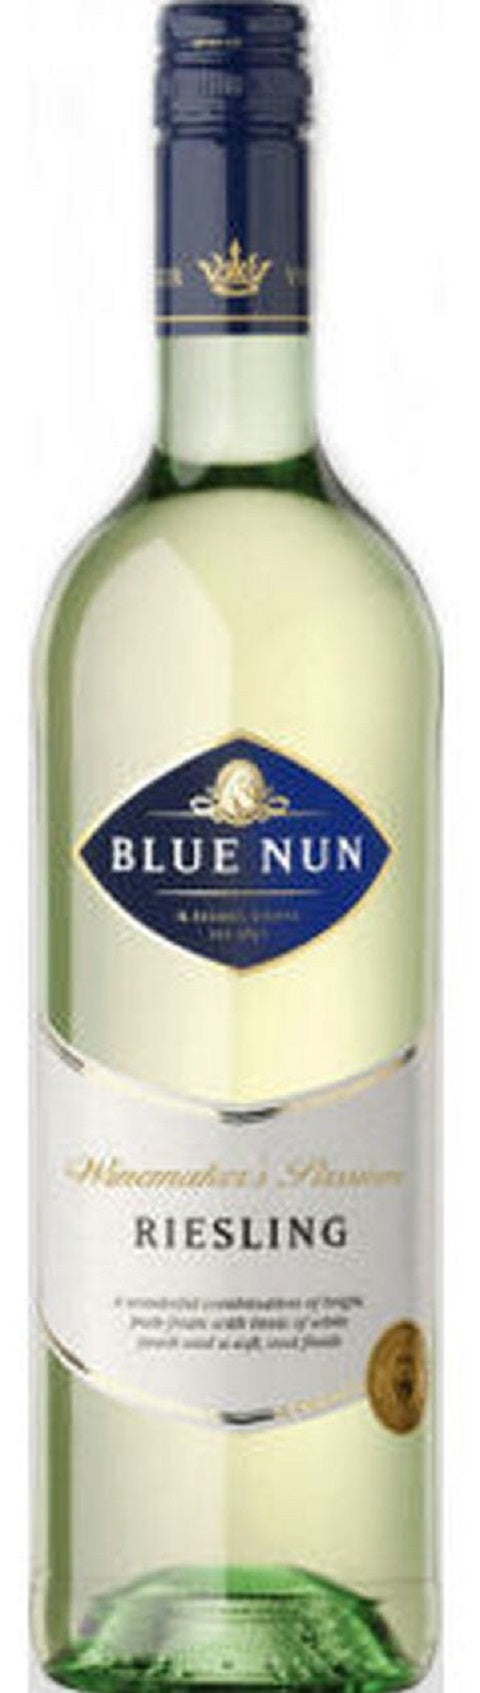 Blue Nun Riesling Winemaker's Passion 2019